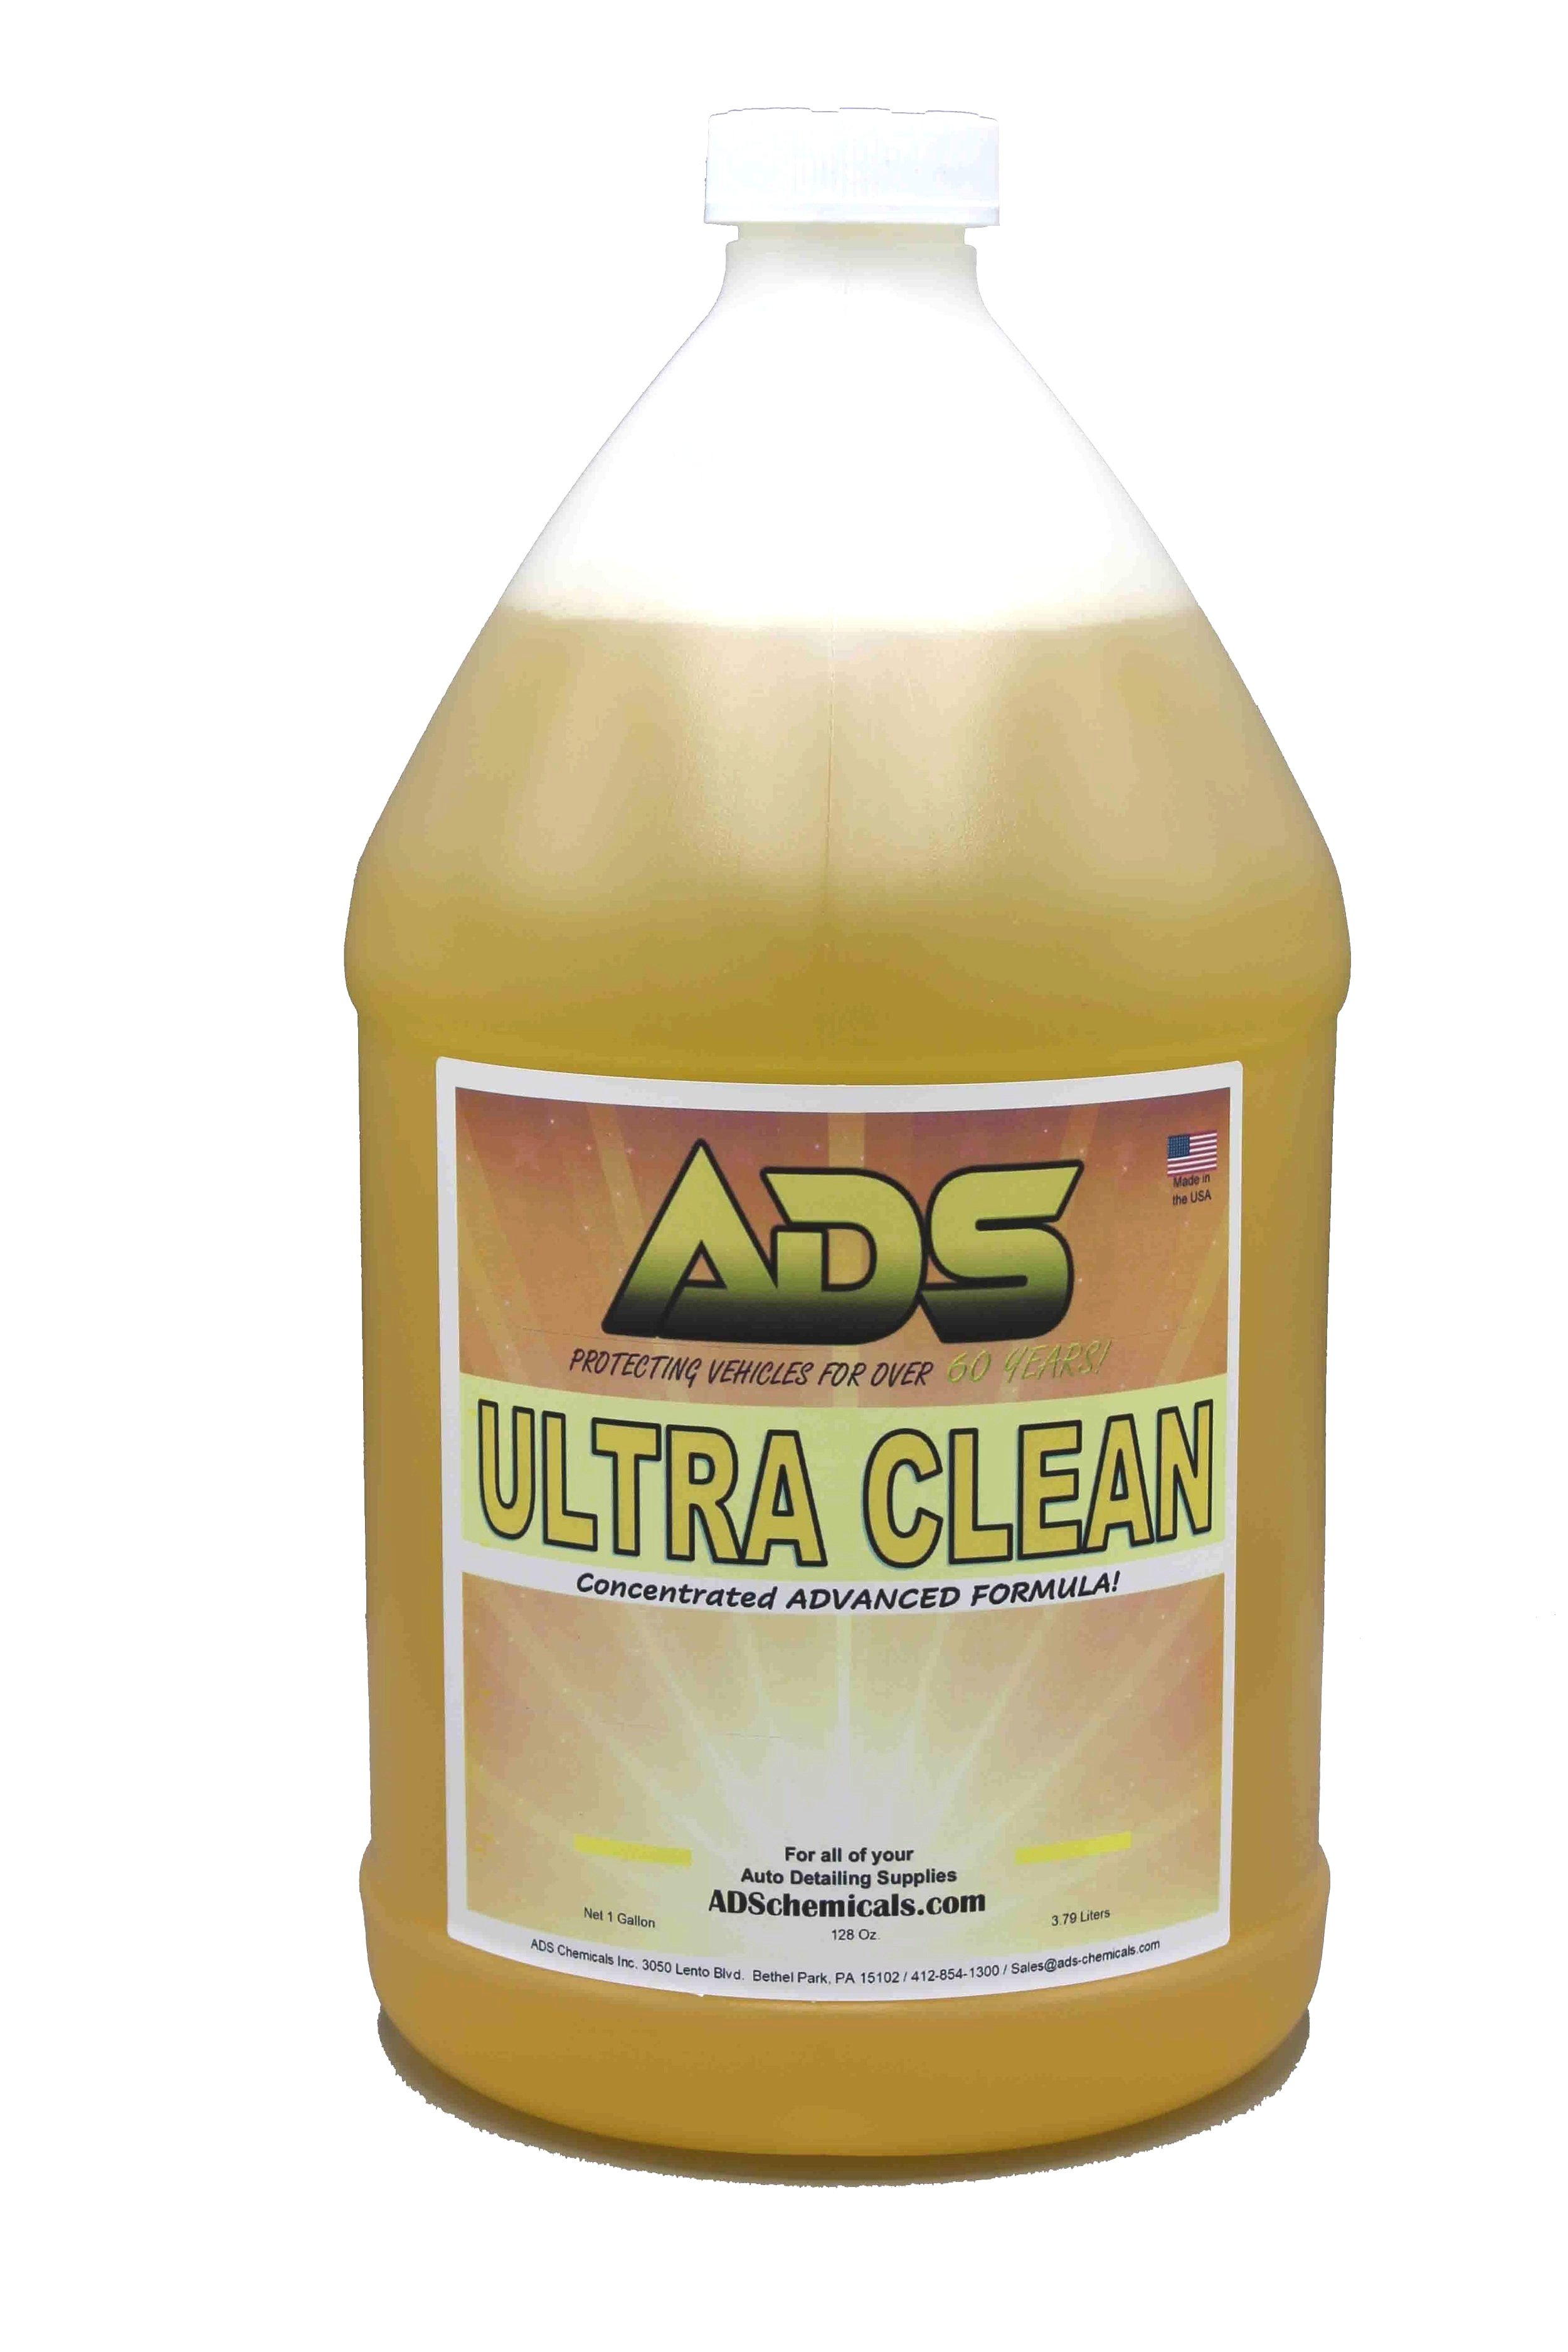 Chrome & Wheel Cleaner — ADS Auto Detail Supplies - ADS Chemicals